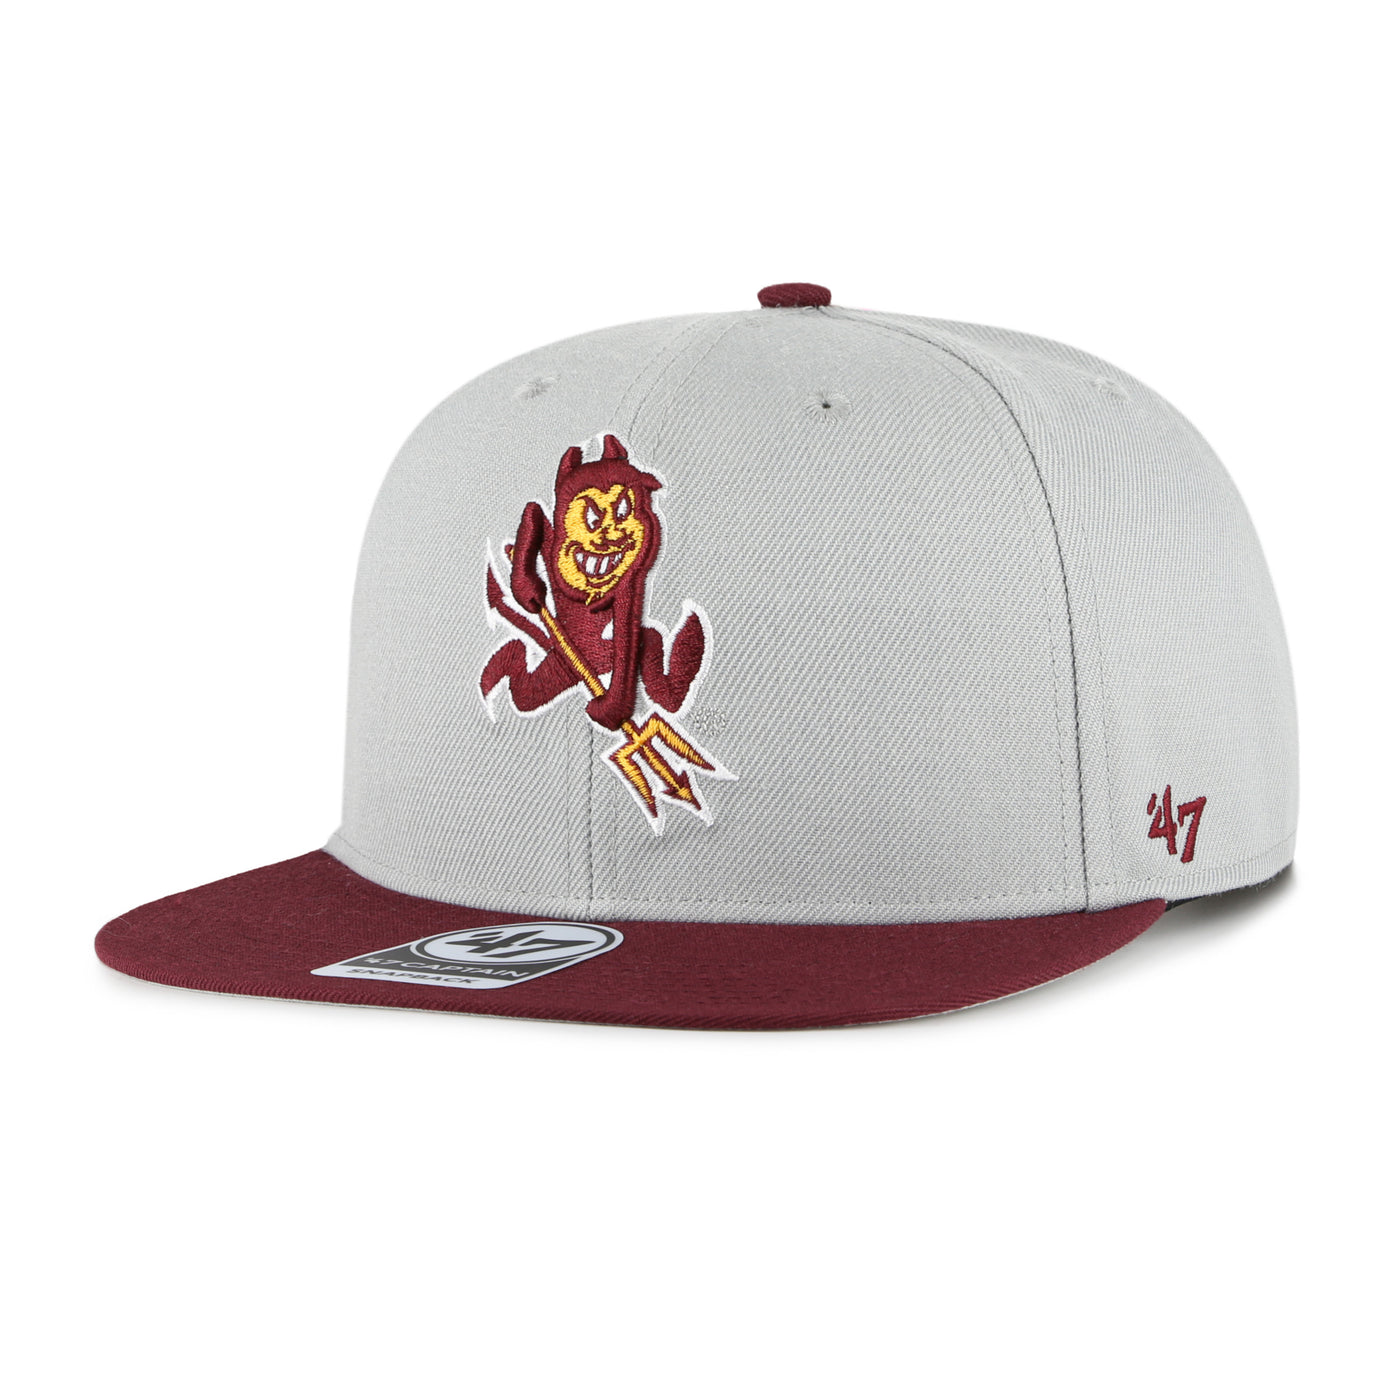 ASU grey flat-bill hat. The bill is maroon and features a embroidered Sparky logo on the front.  